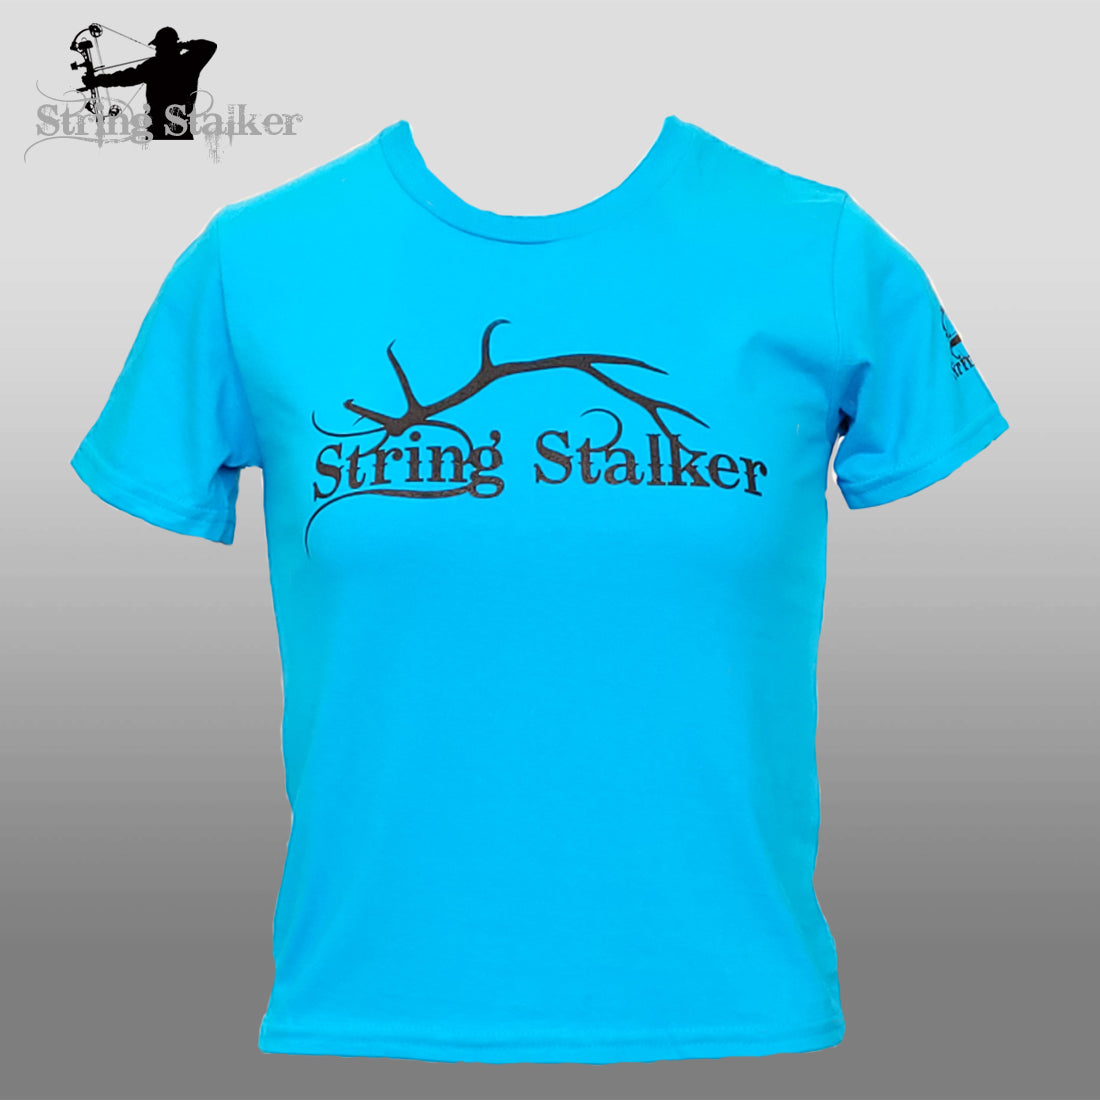 Youth Girls Shed Stalker Tee - Sapphire